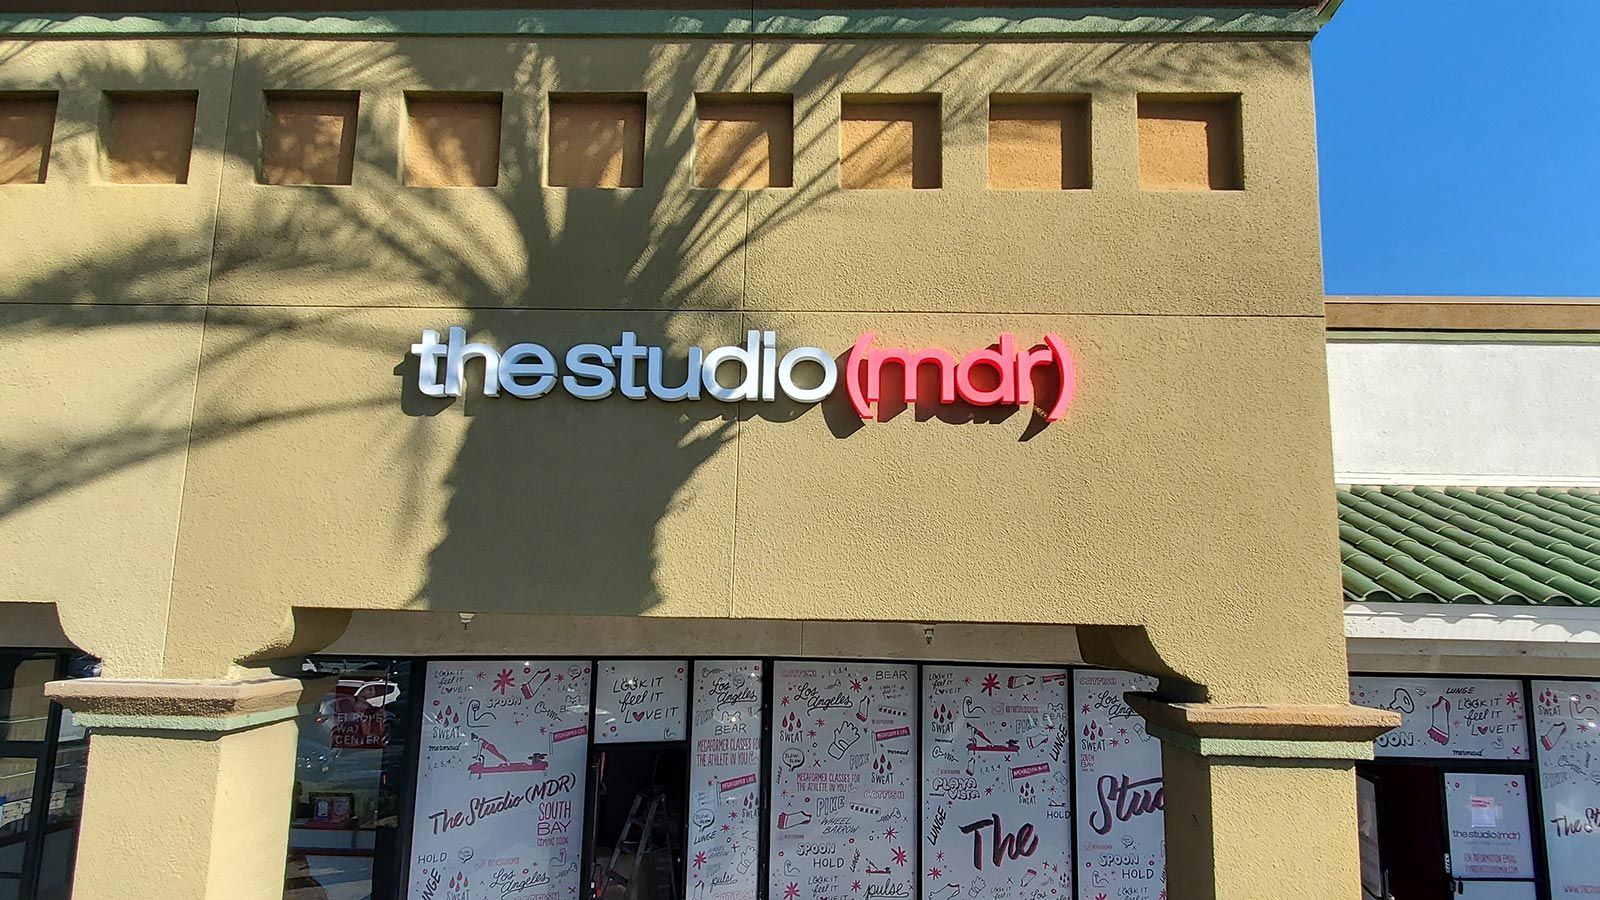 The Studio (MDR) 3D sign attached to the building